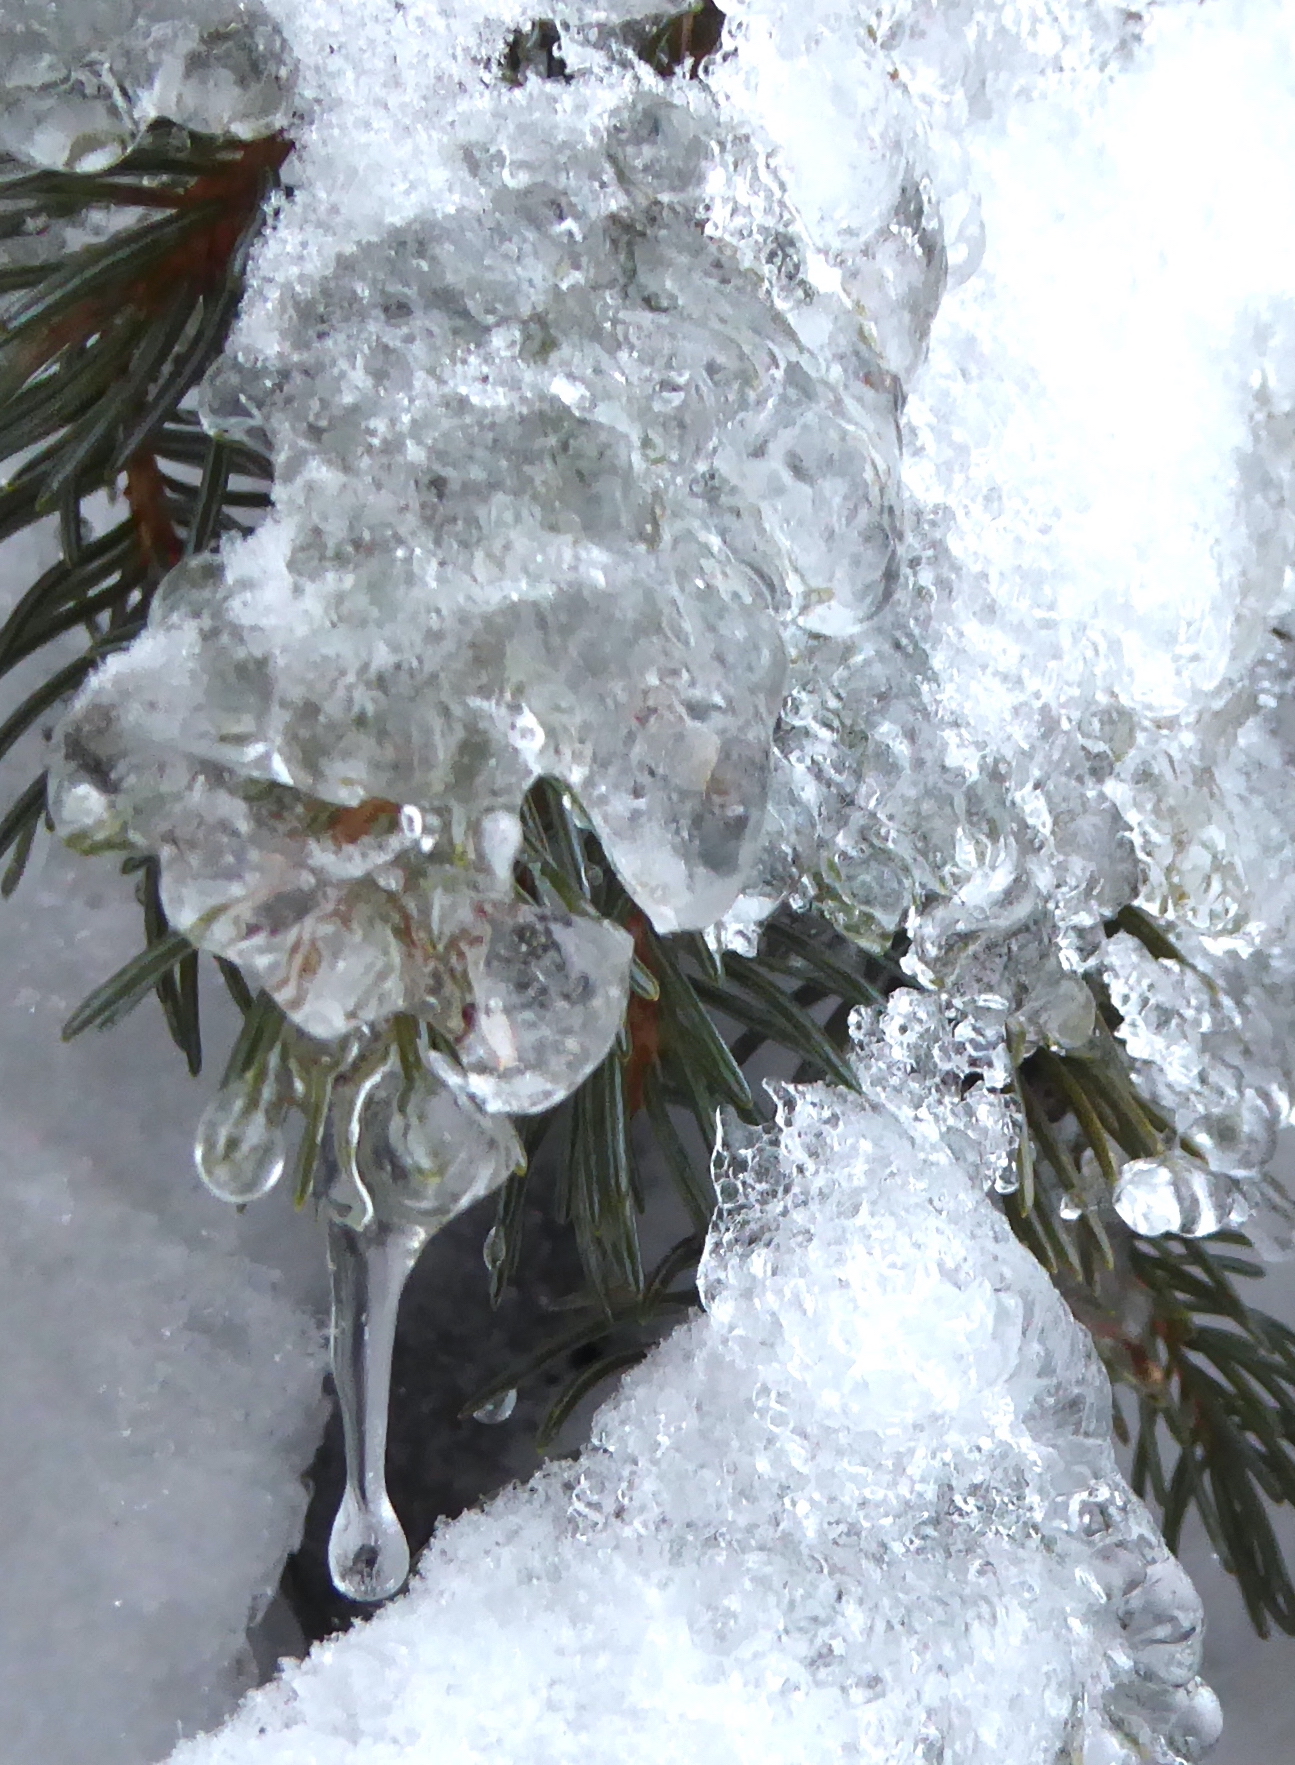 Ice and snow hang from a branch covered in spruce needles.